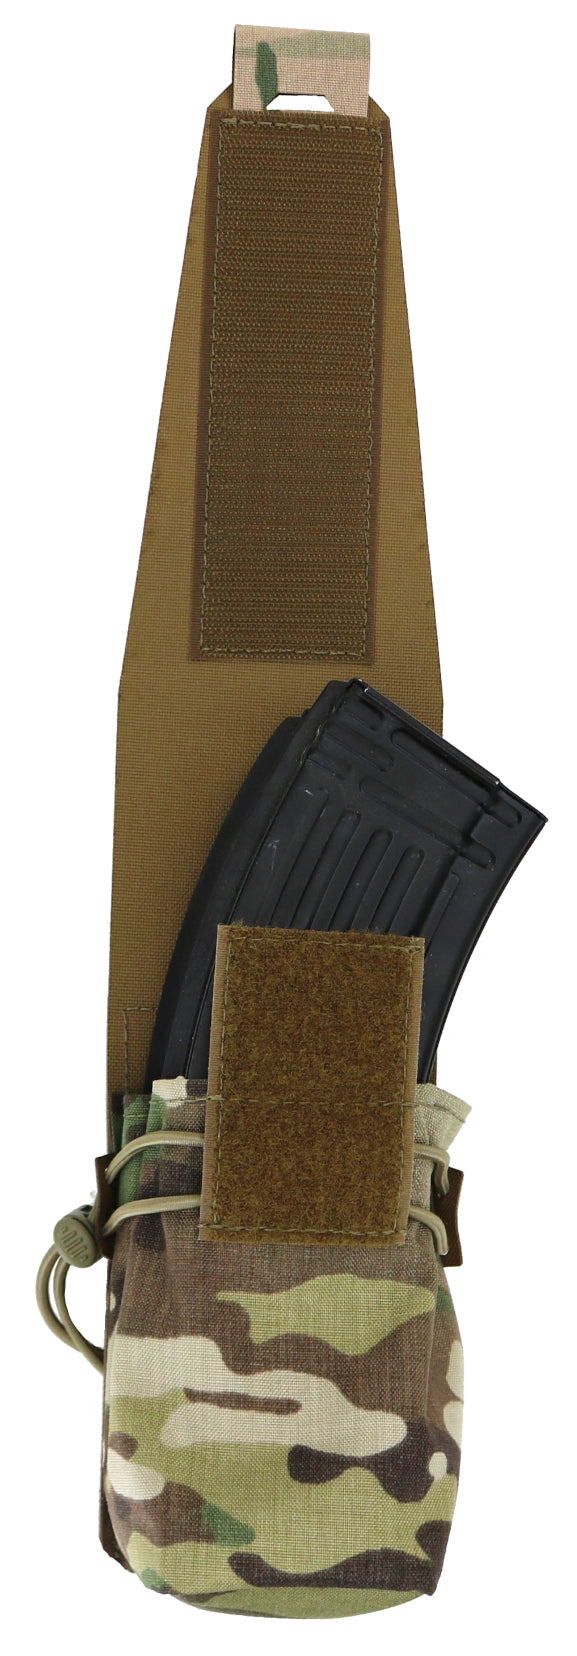 Universal Mag Pouch